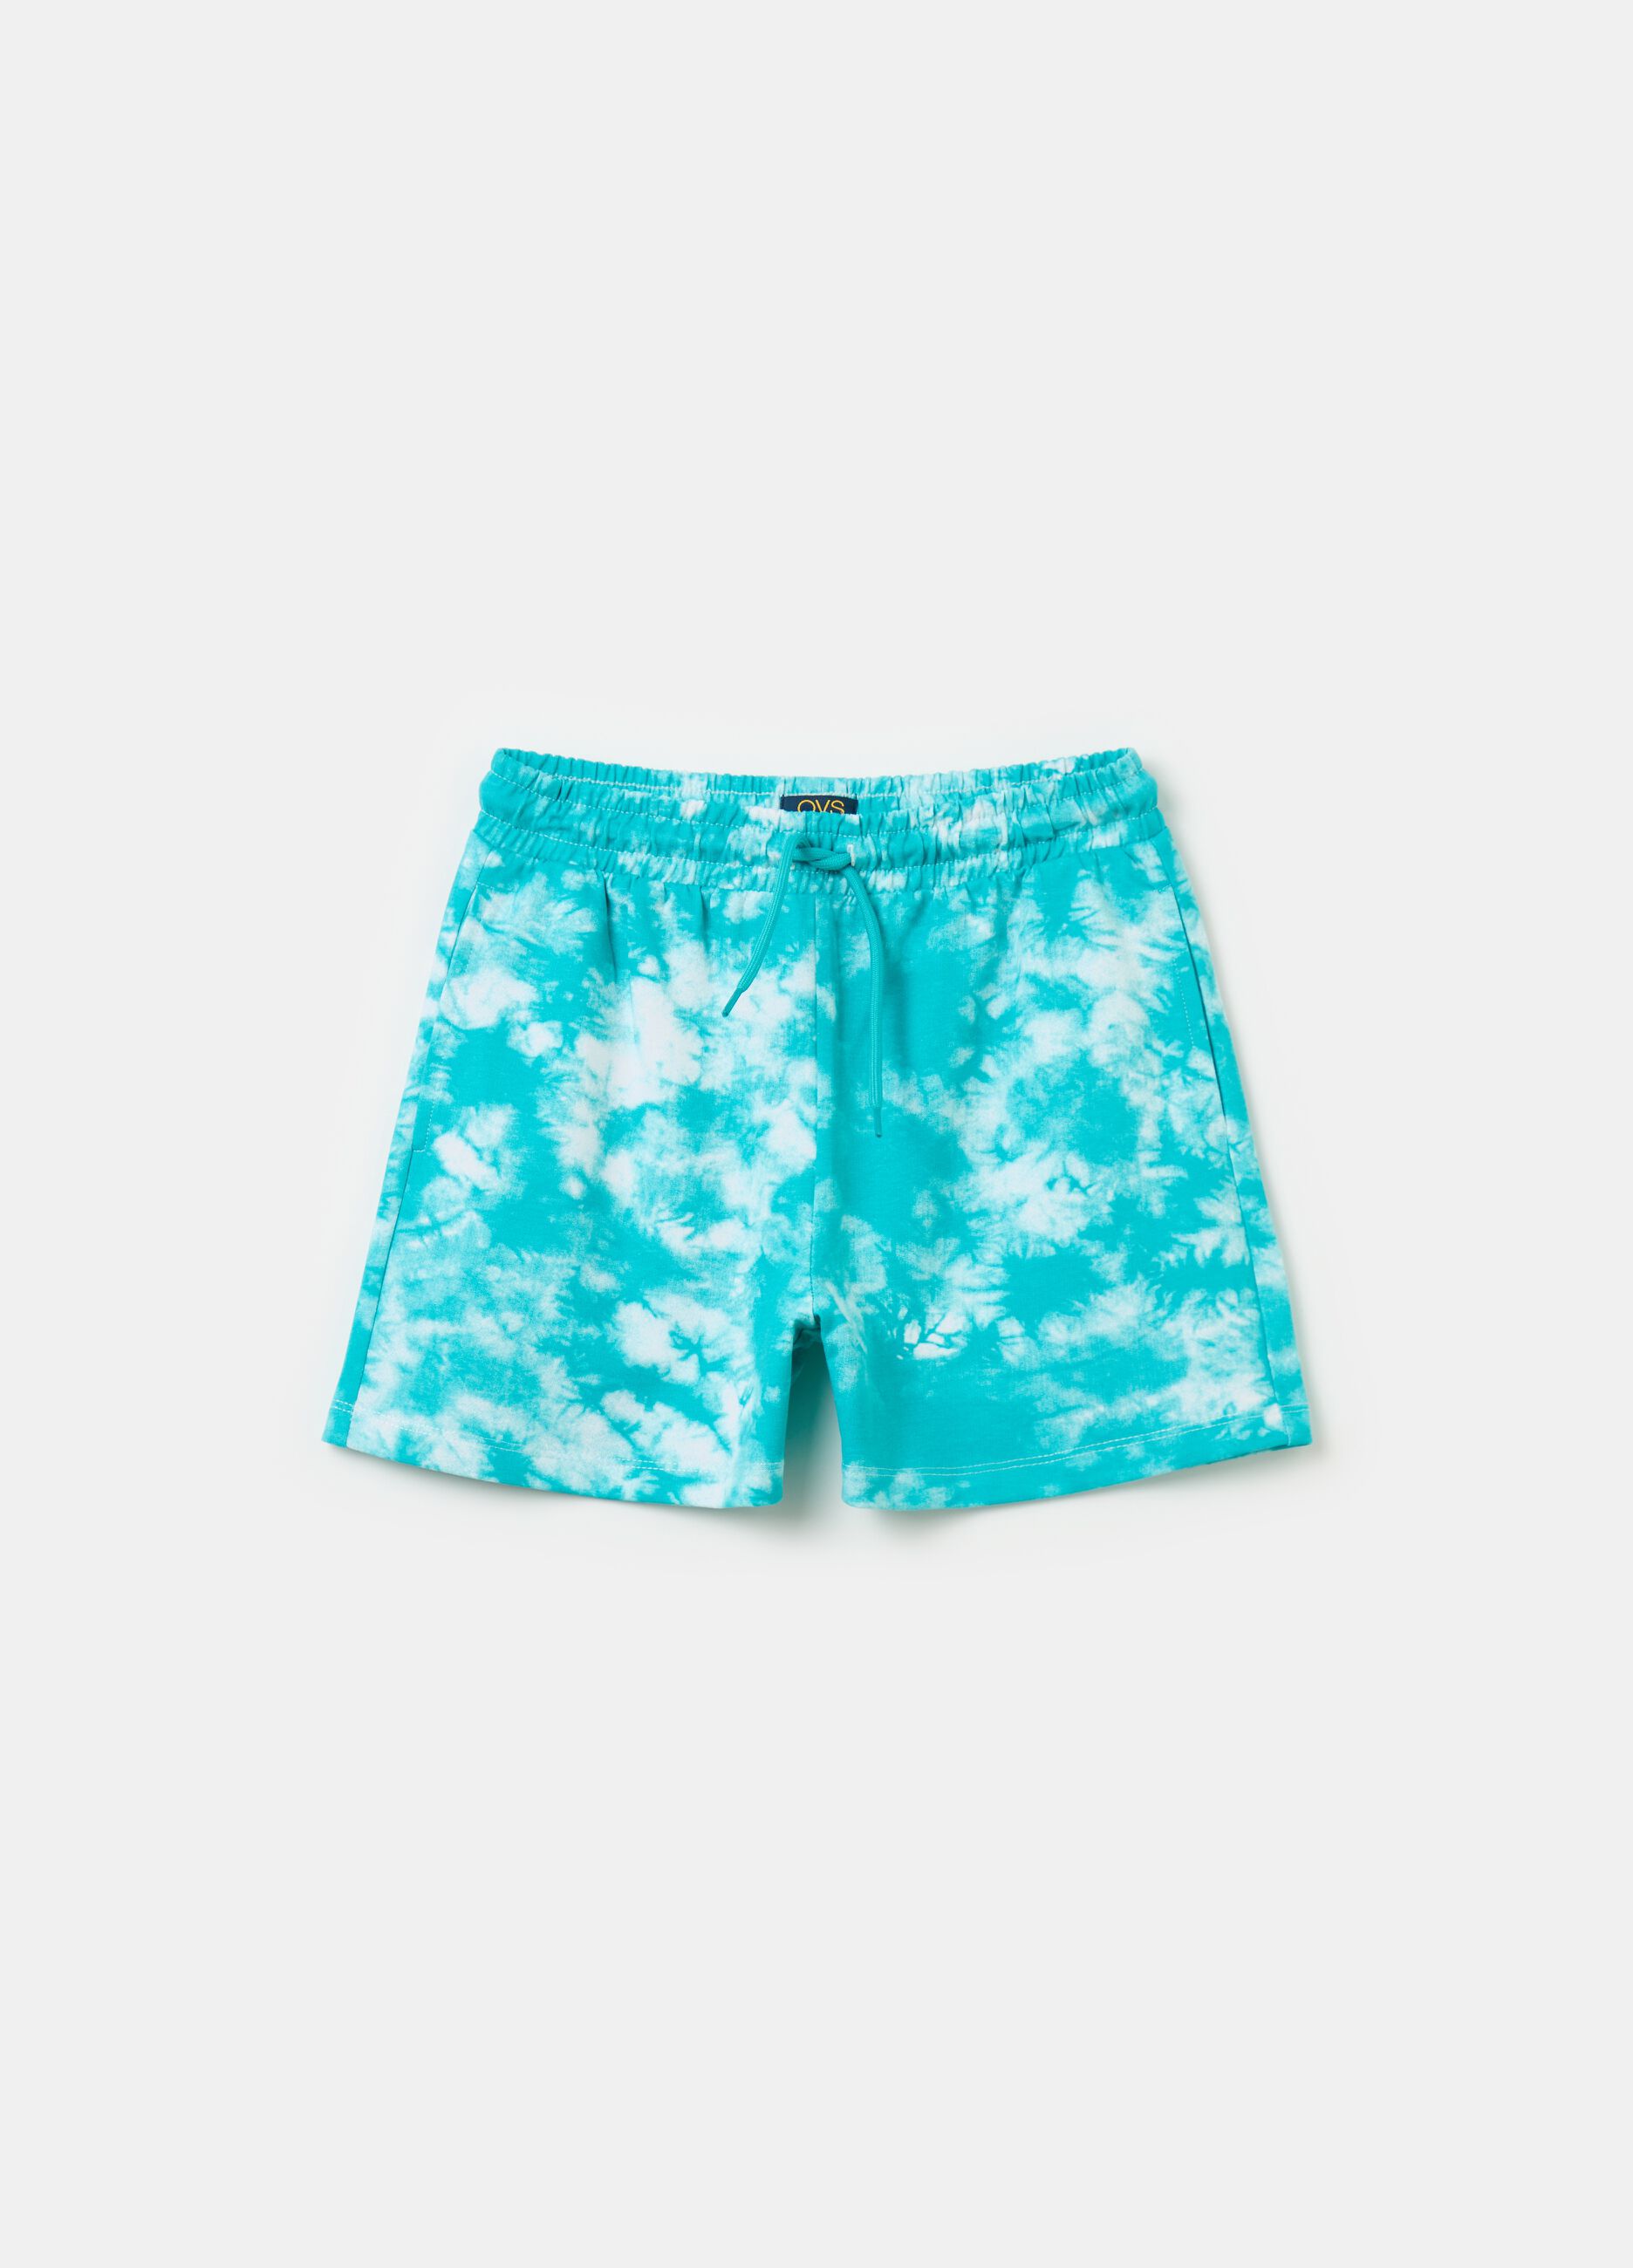 Shorts in French Terry Tie Dye